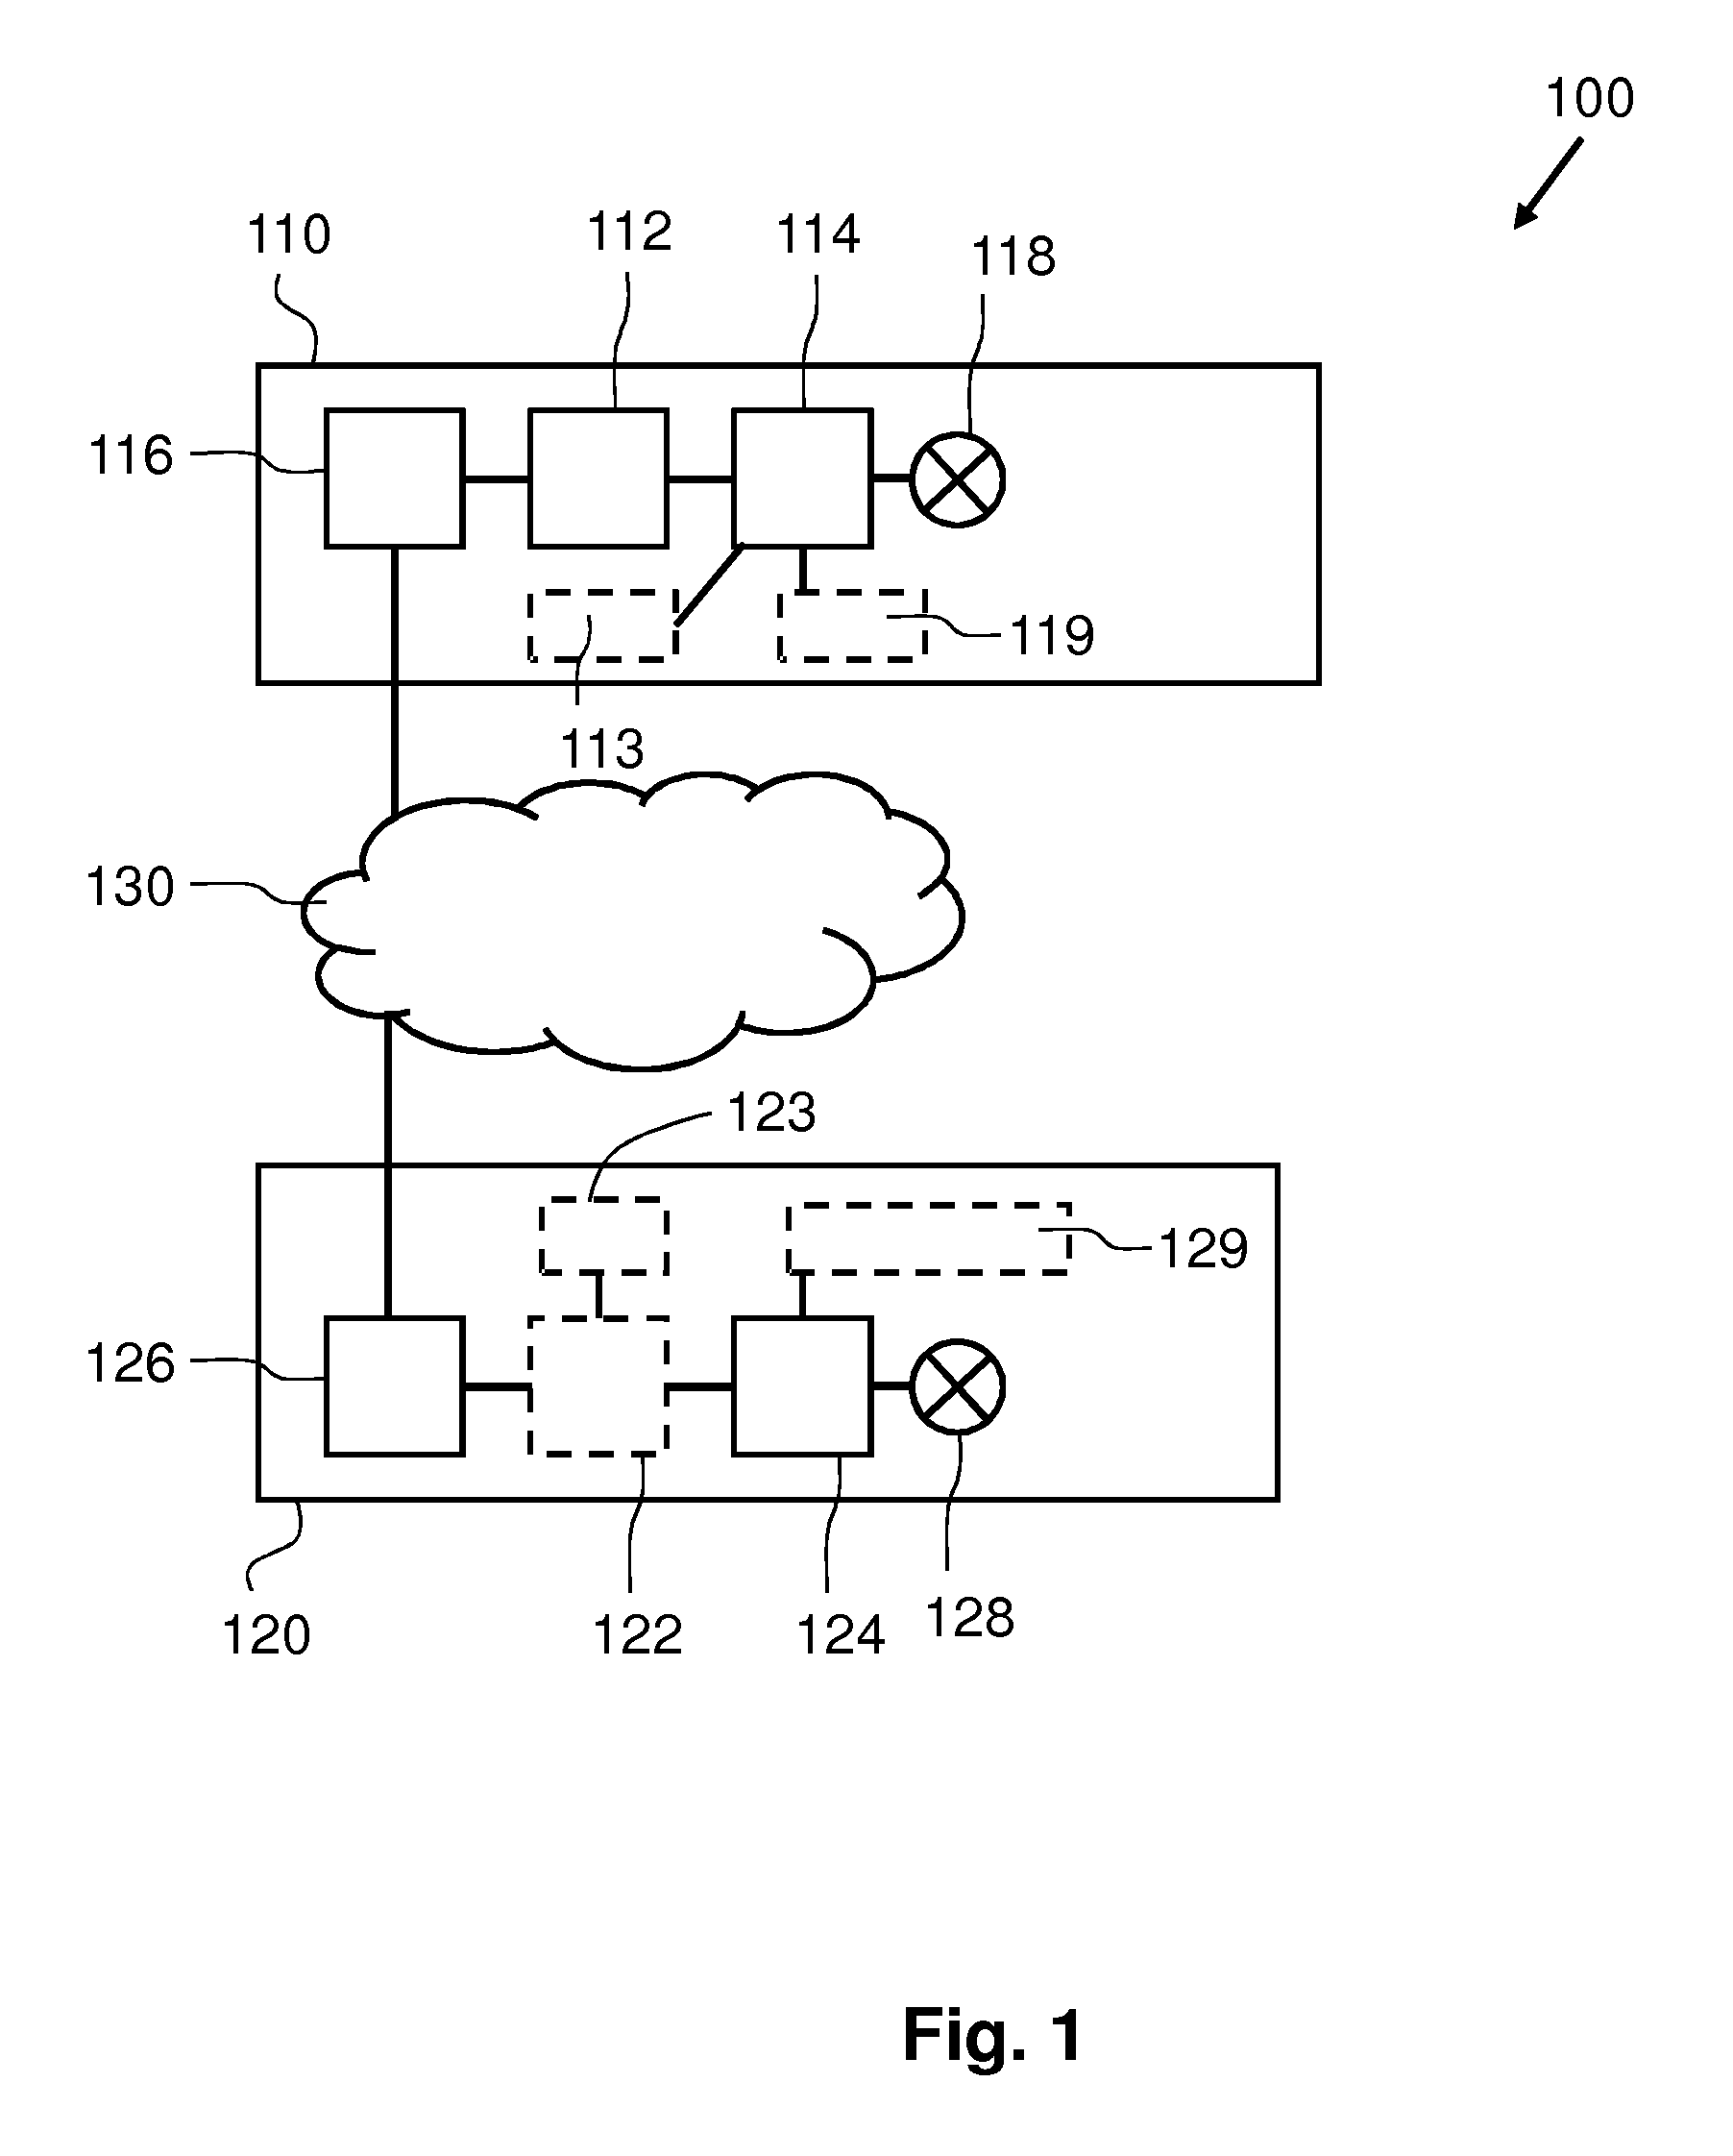 Lighting system for illuminating an environment and a method of starting an installation of a program on a programmable controller